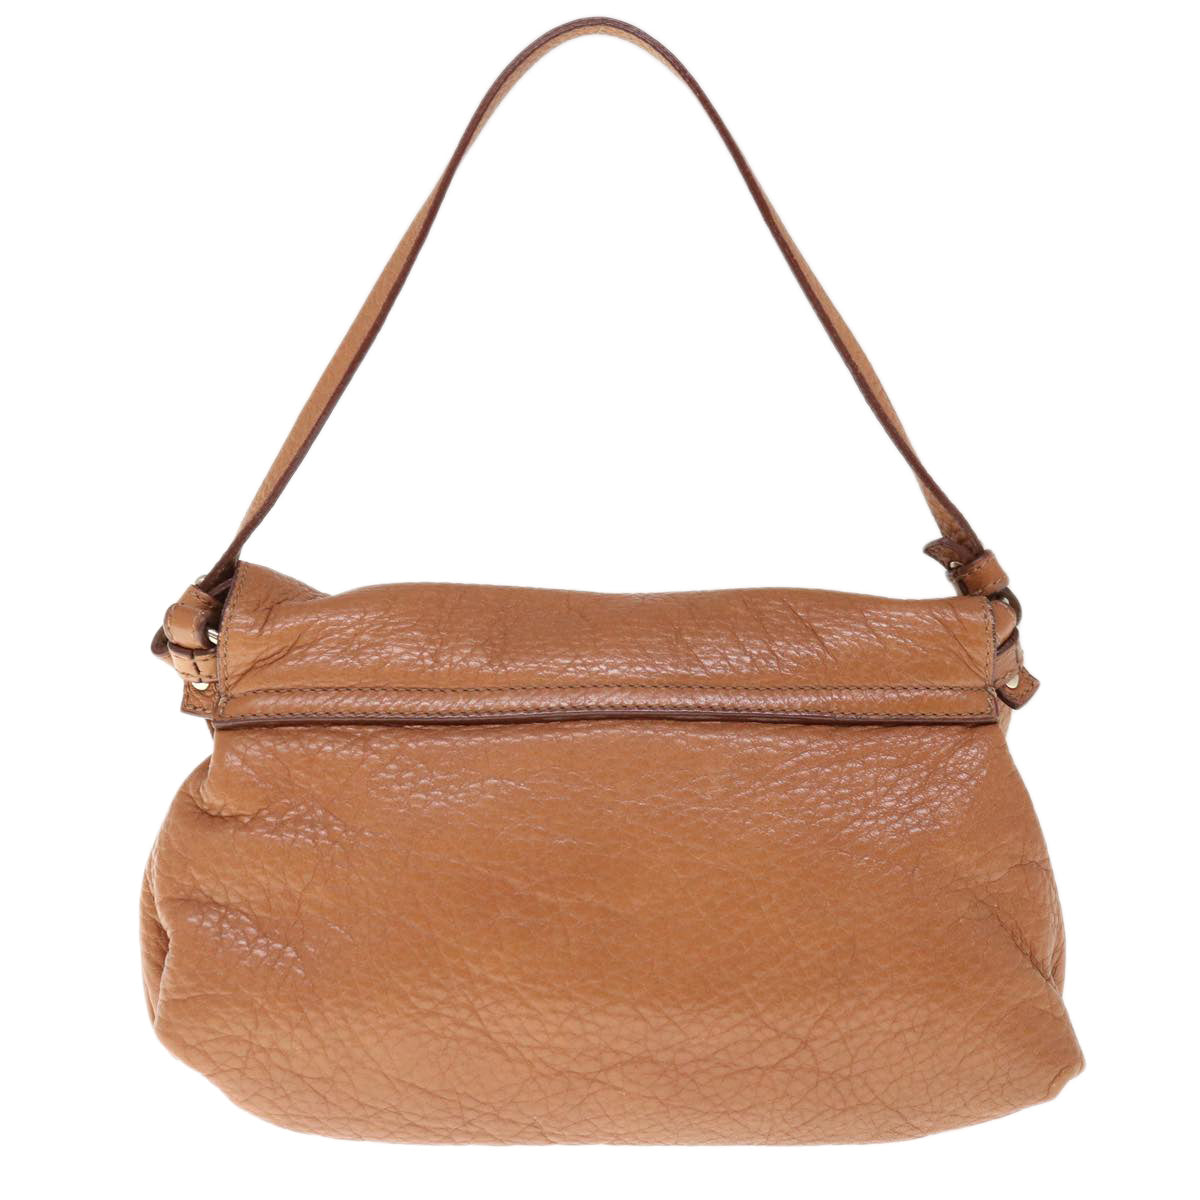 Chloe Lily Hand Bag Leather 2way Brown Auth yk10587 - 0